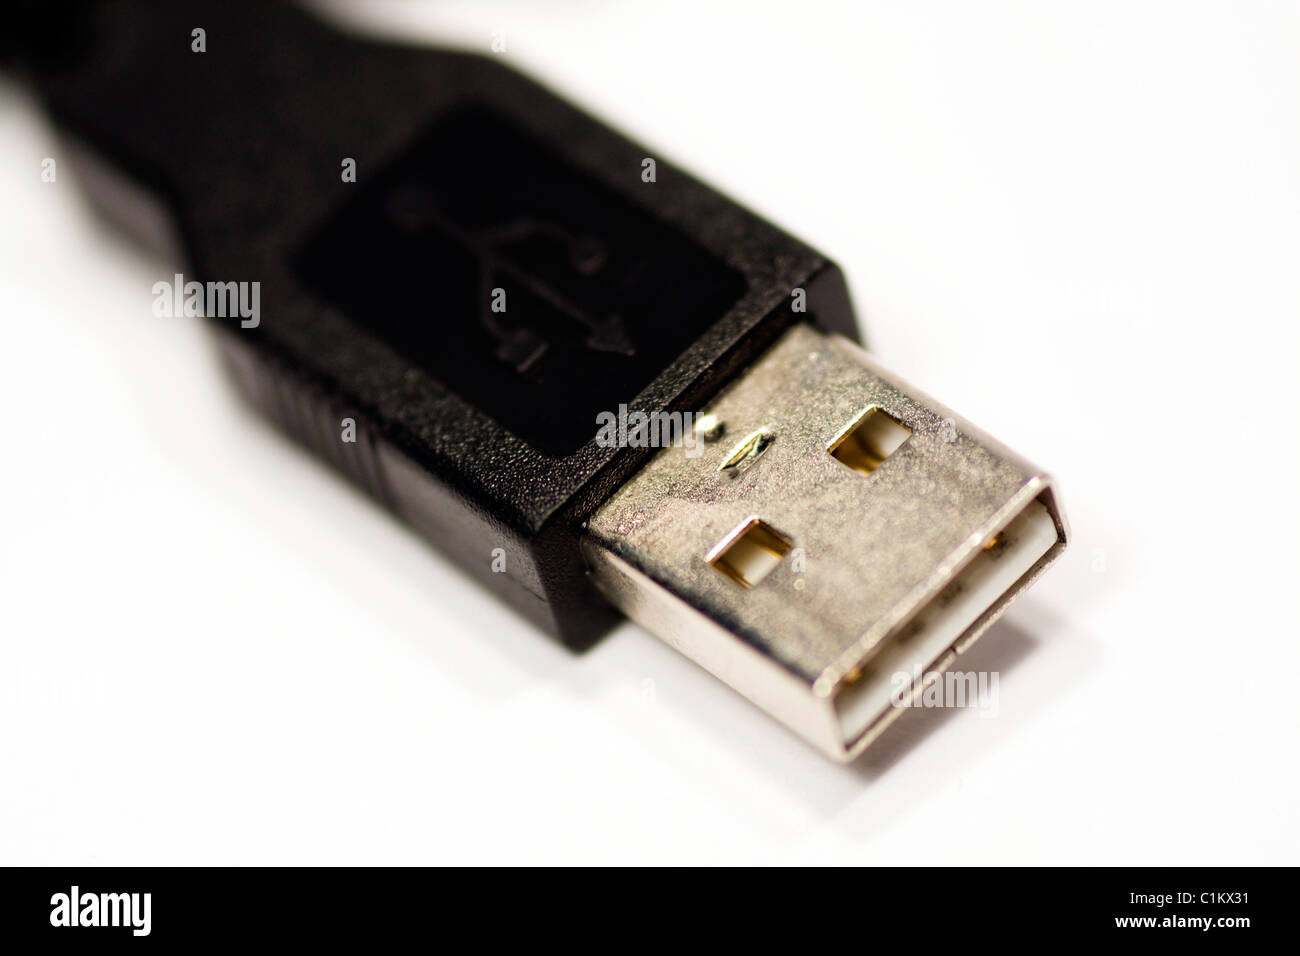 Closeup view of a black USB connection cable isolated on a white background. Stock Photo